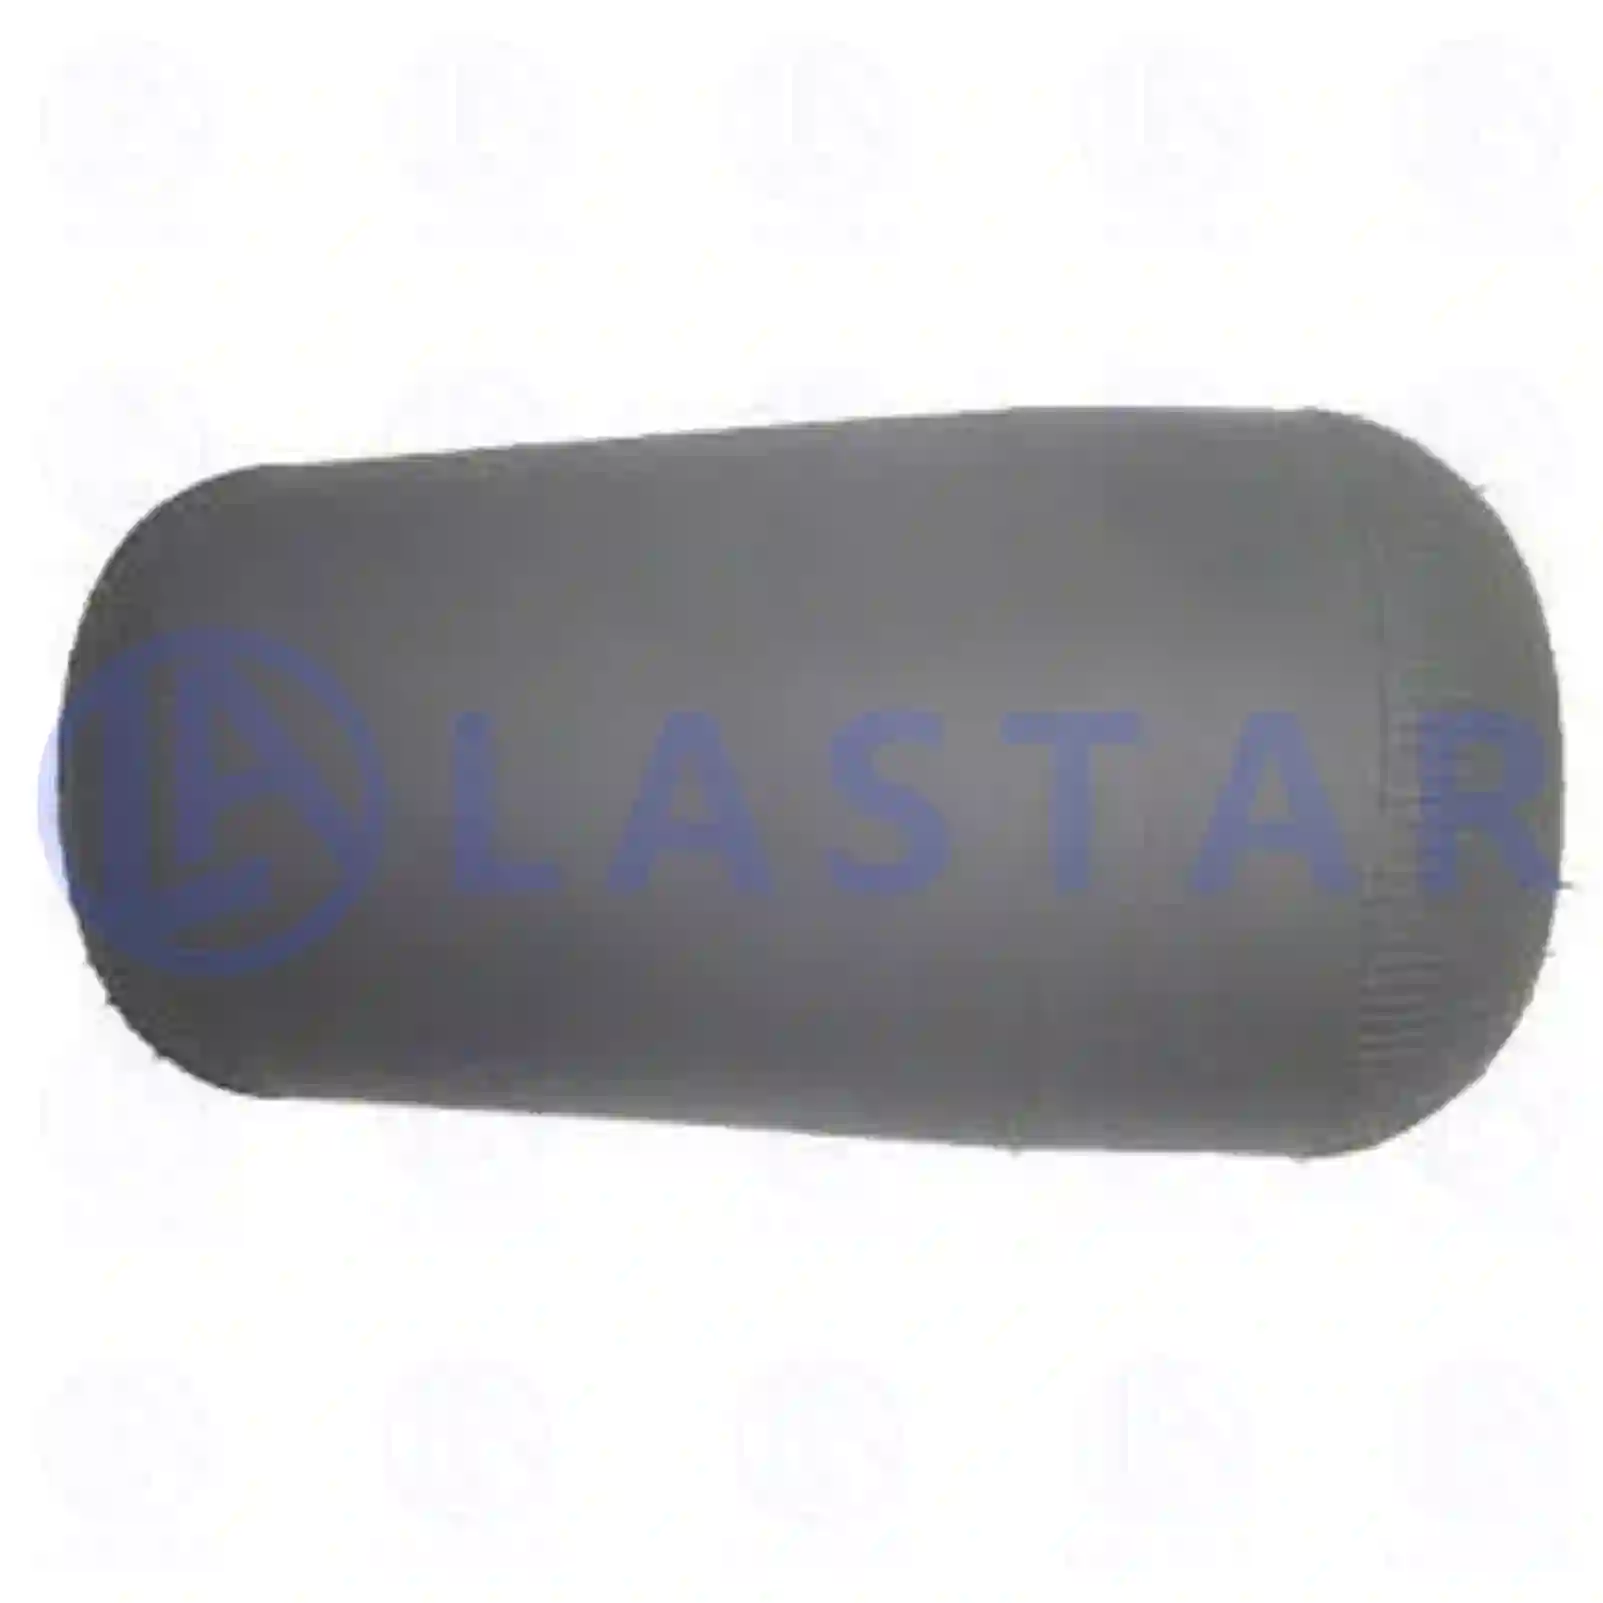 Air spring, without piston, 77728137, 3933280101, 3933280201, ||  77728137 Lastar Spare Part | Truck Spare Parts, Auotomotive Spare Parts Air spring, without piston, 77728137, 3933280101, 3933280201, ||  77728137 Lastar Spare Part | Truck Spare Parts, Auotomotive Spare Parts